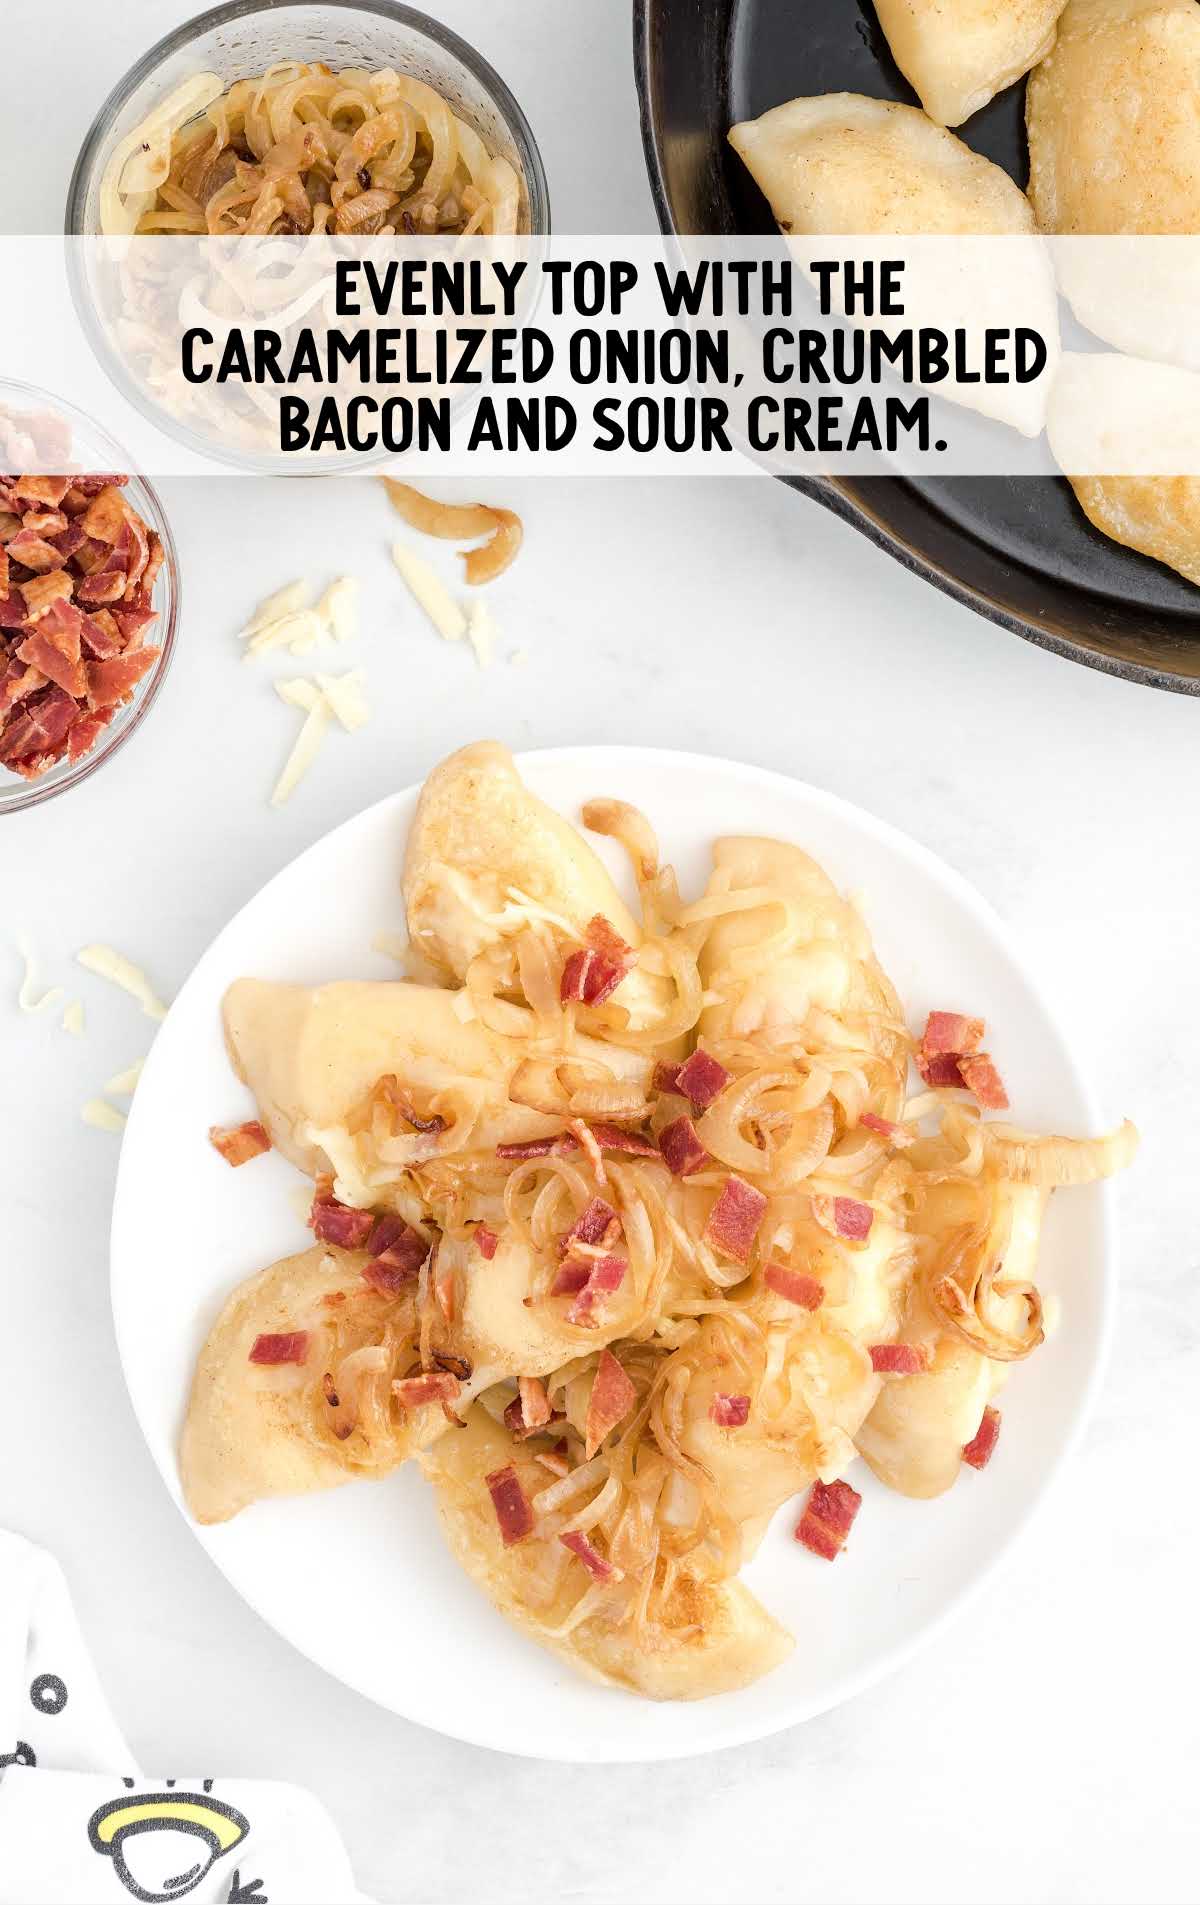 onion, crumble bacon, and sour cream topped on top of the pierogi